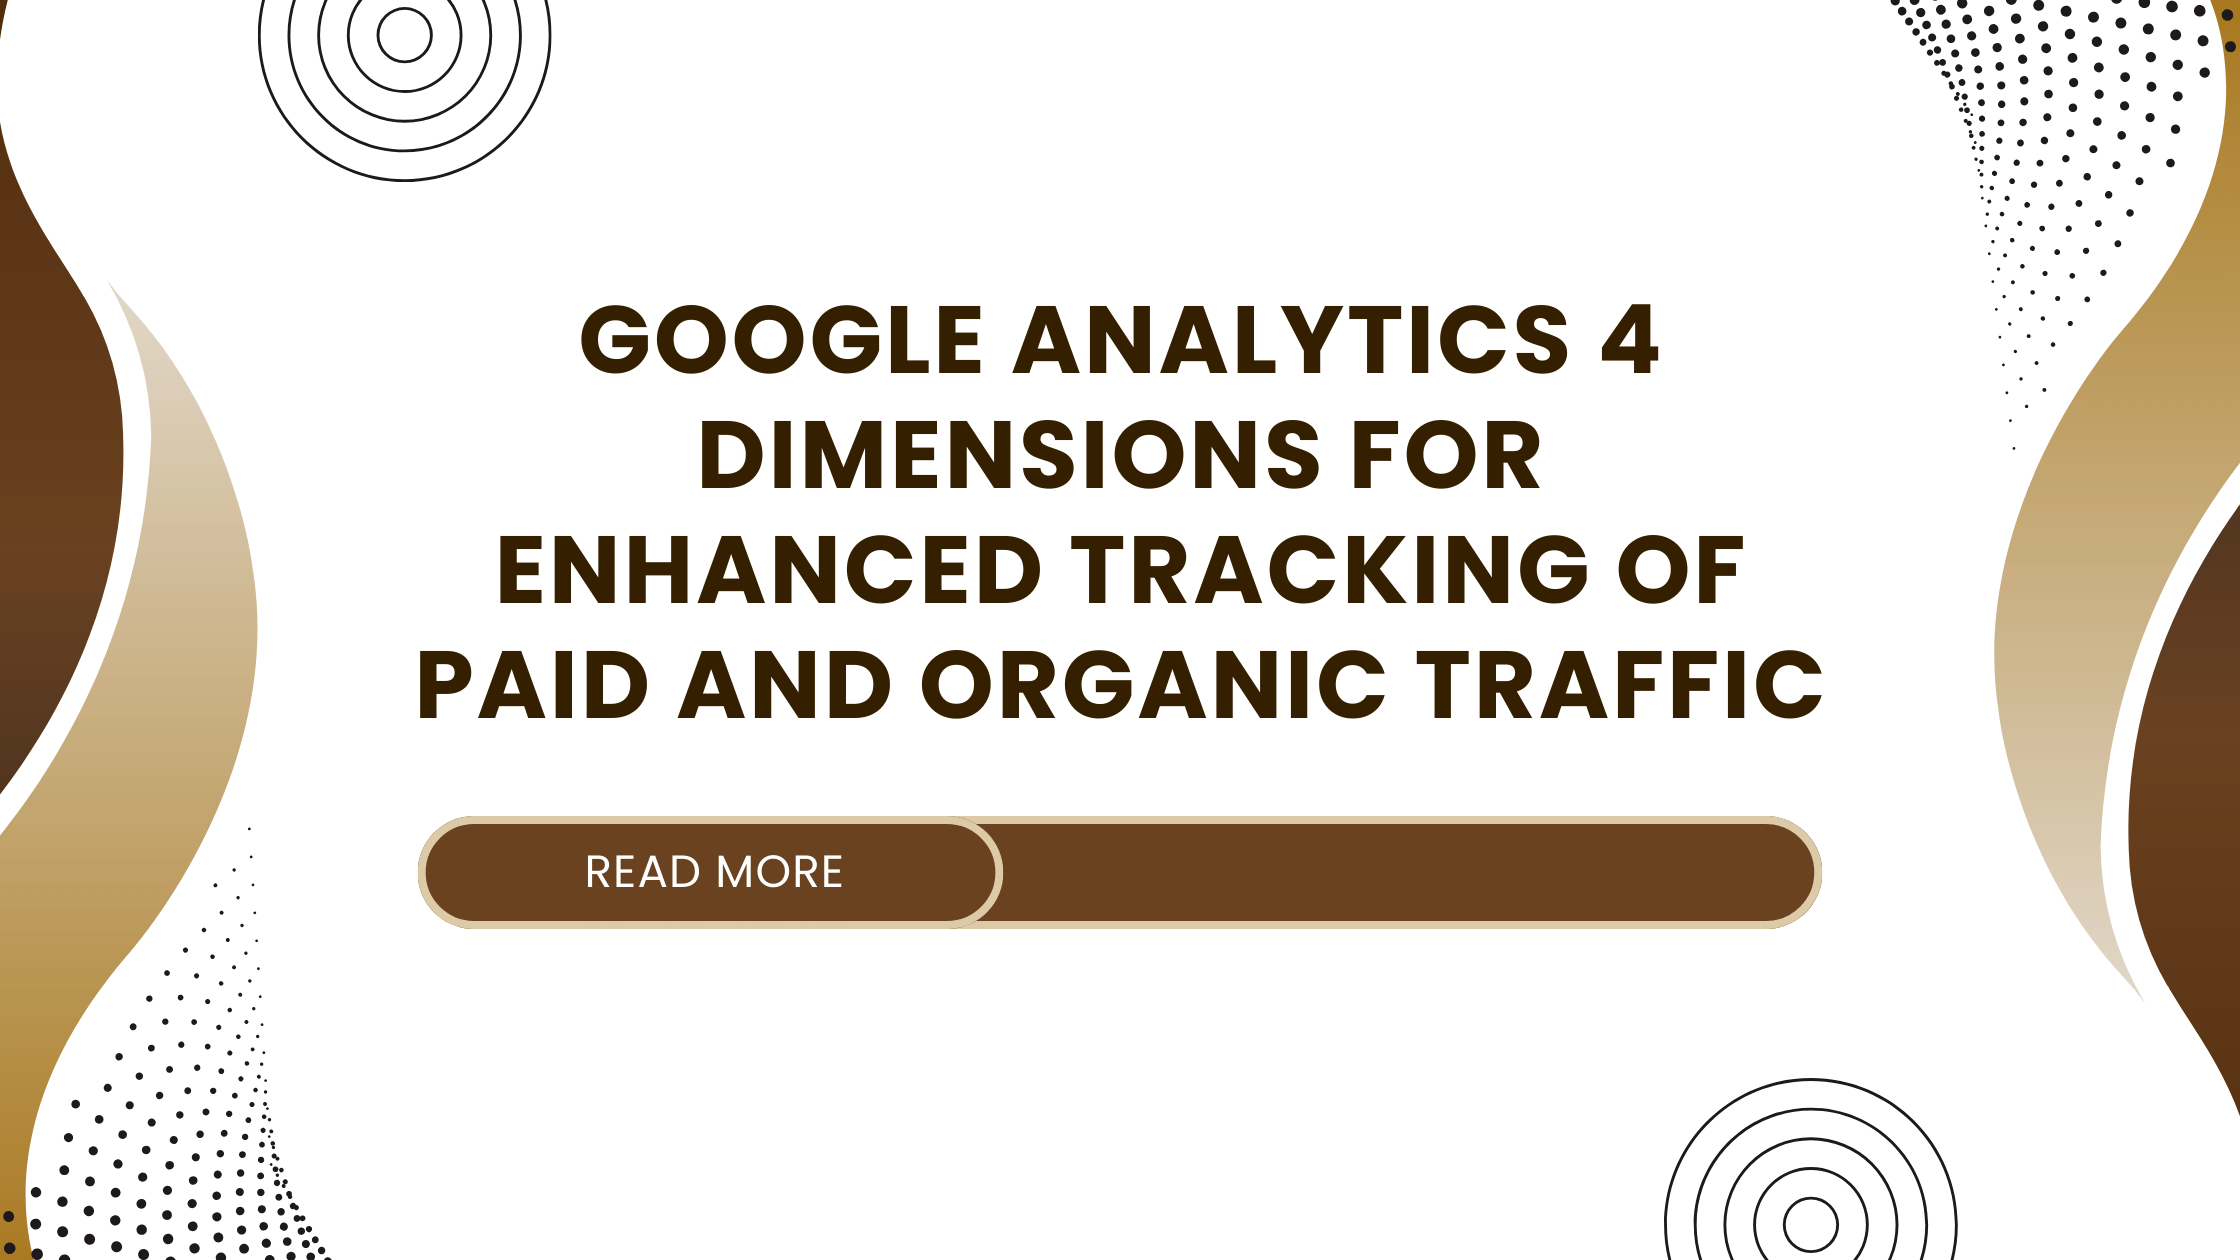 Google Analytics 4 Dimensions for Enhanced Tracking of Paid and Organic Traffic